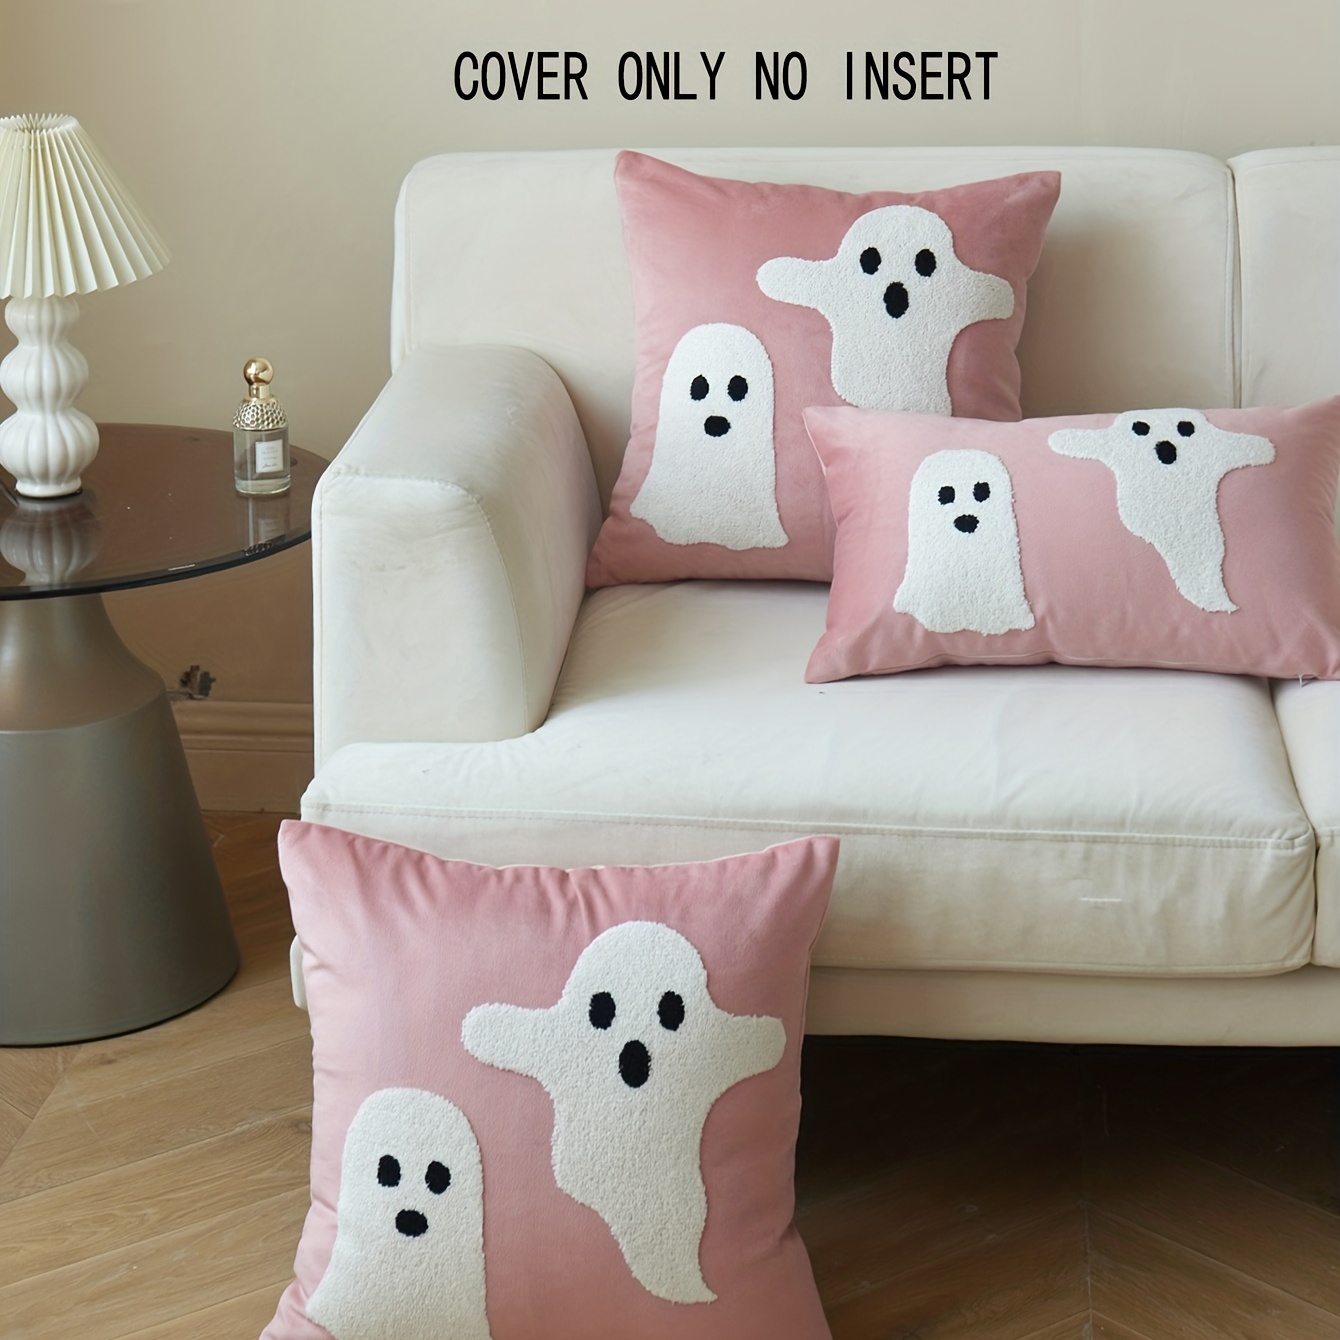 30cm/11.81inch Cute Round Toot Soft Down Cotton Ghost Throw Pillow Plush Toy